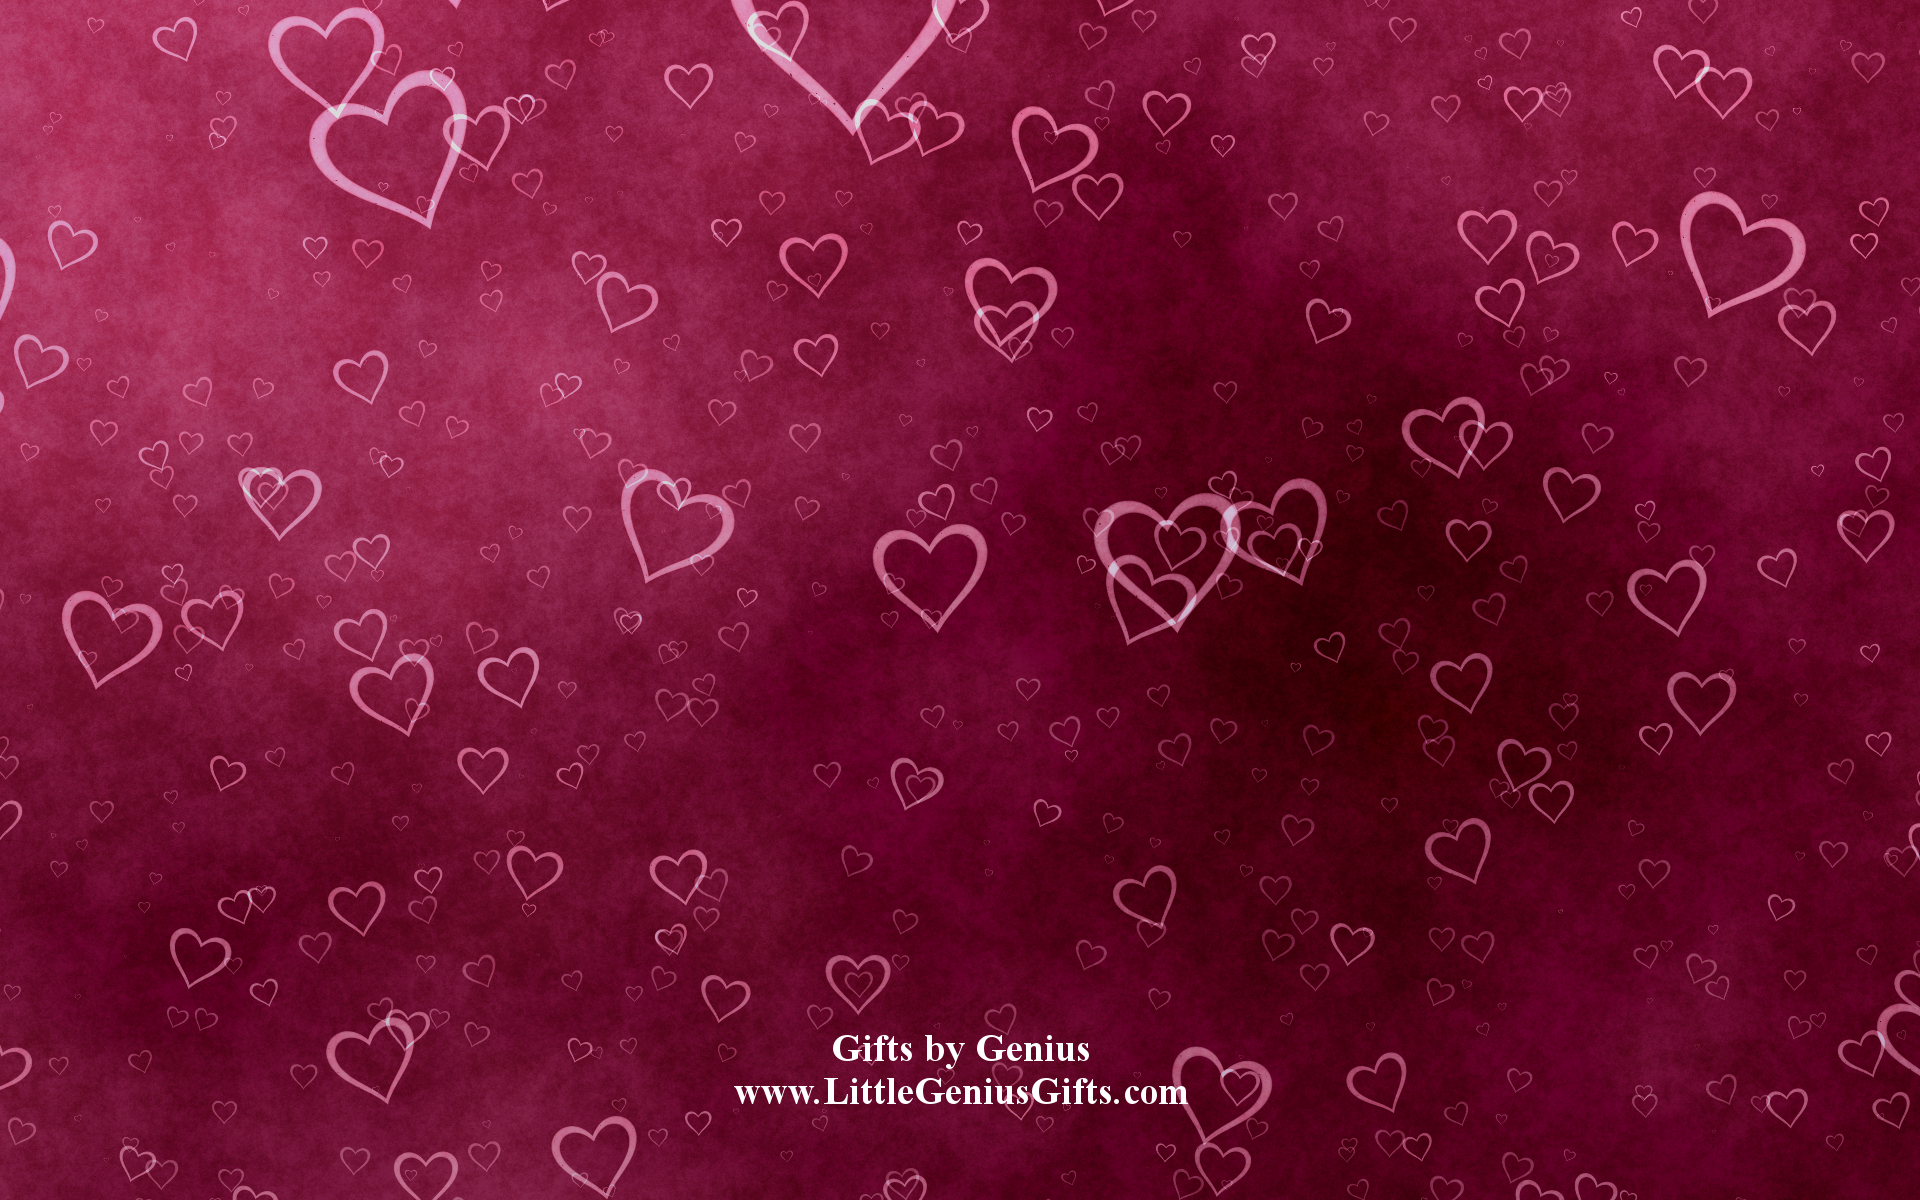  Valentines Day Computer Desktop Wallpapers Gifts by Genius 1920x1200